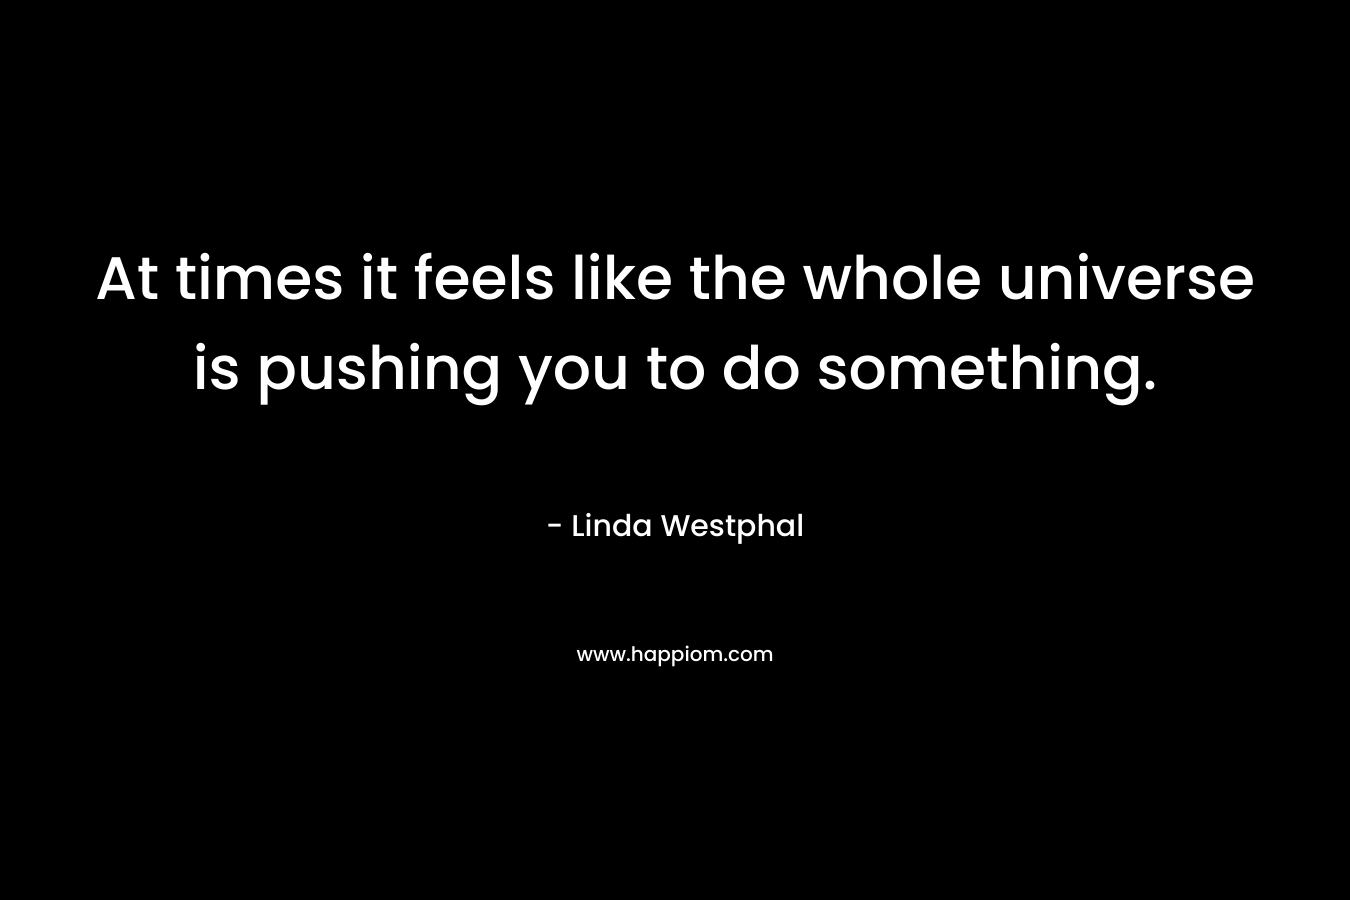 At times it feels like the whole universe is pushing you to do something.